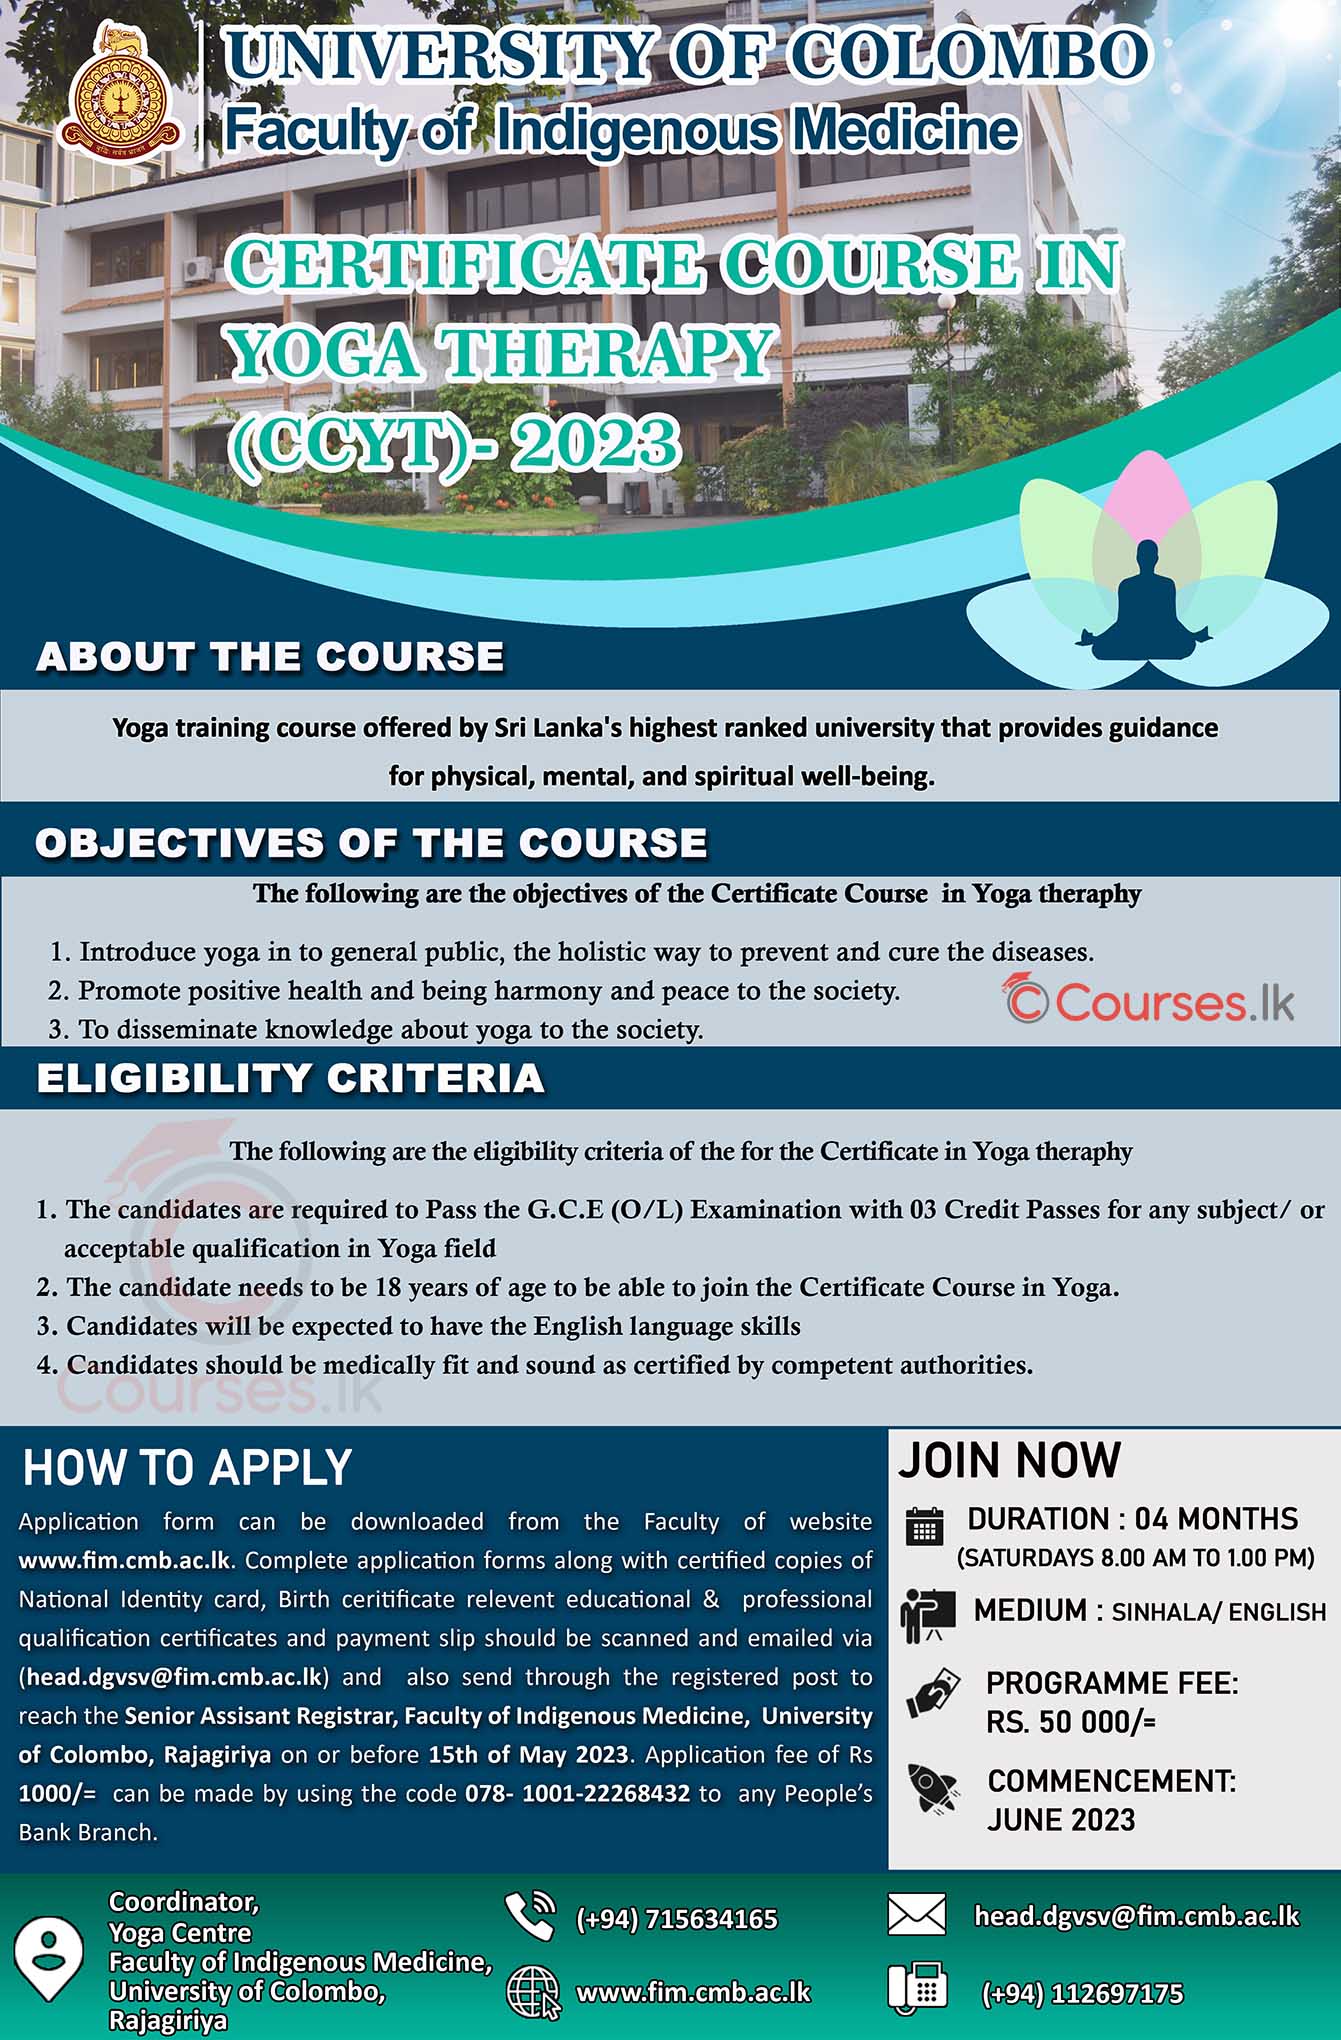 Certificate Course in Yoga Therapy 2023 - University of Colombo